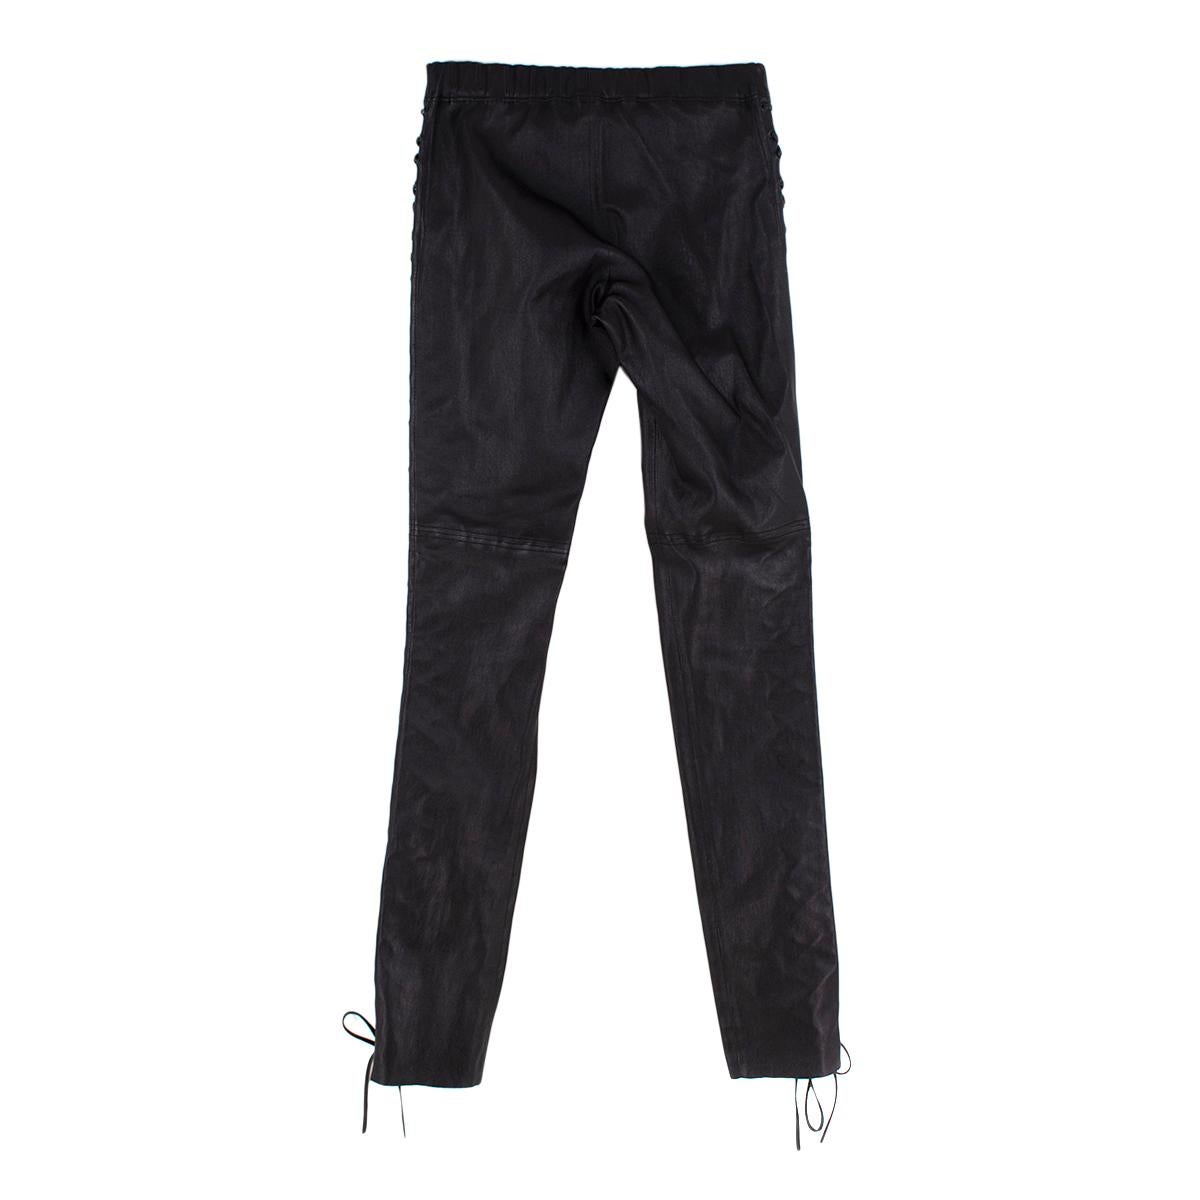 Joseph Harley Stretch Leather Pants 

- Lace-Up Detail to the legs
- Pull on
- Unlined
-Made from fine lambskin
-Elastic waistband 

Measurements: 

38cm waist
38cm hip
20cm rise 
109cm length 
93cm inside leg 

All measurements are taken when the